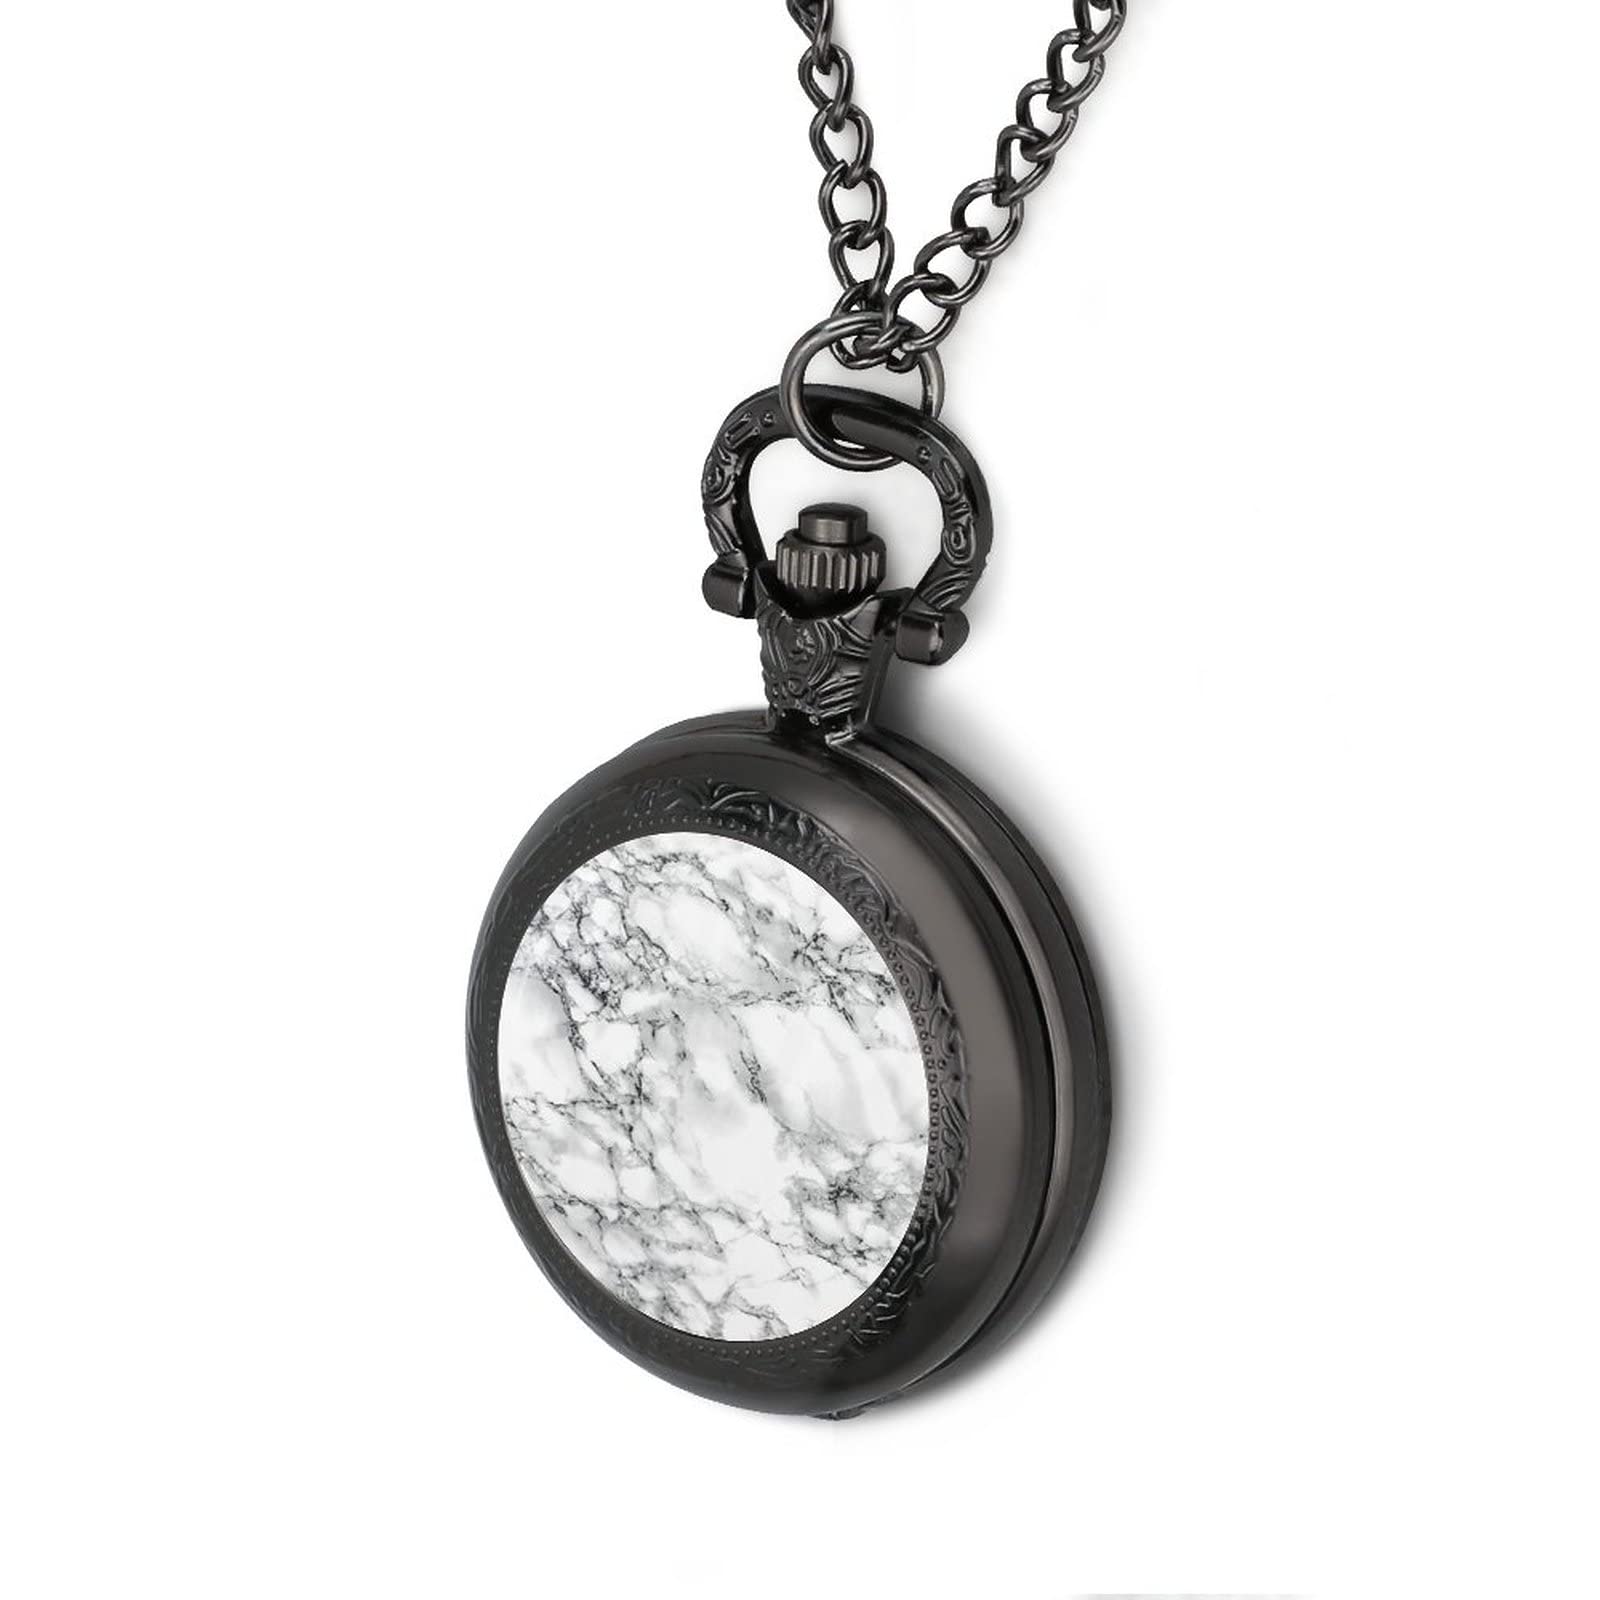 White Marble Texture Pattern Pocket Watches for Men with Chain Digital Vintage Mechanical Pocket Watch